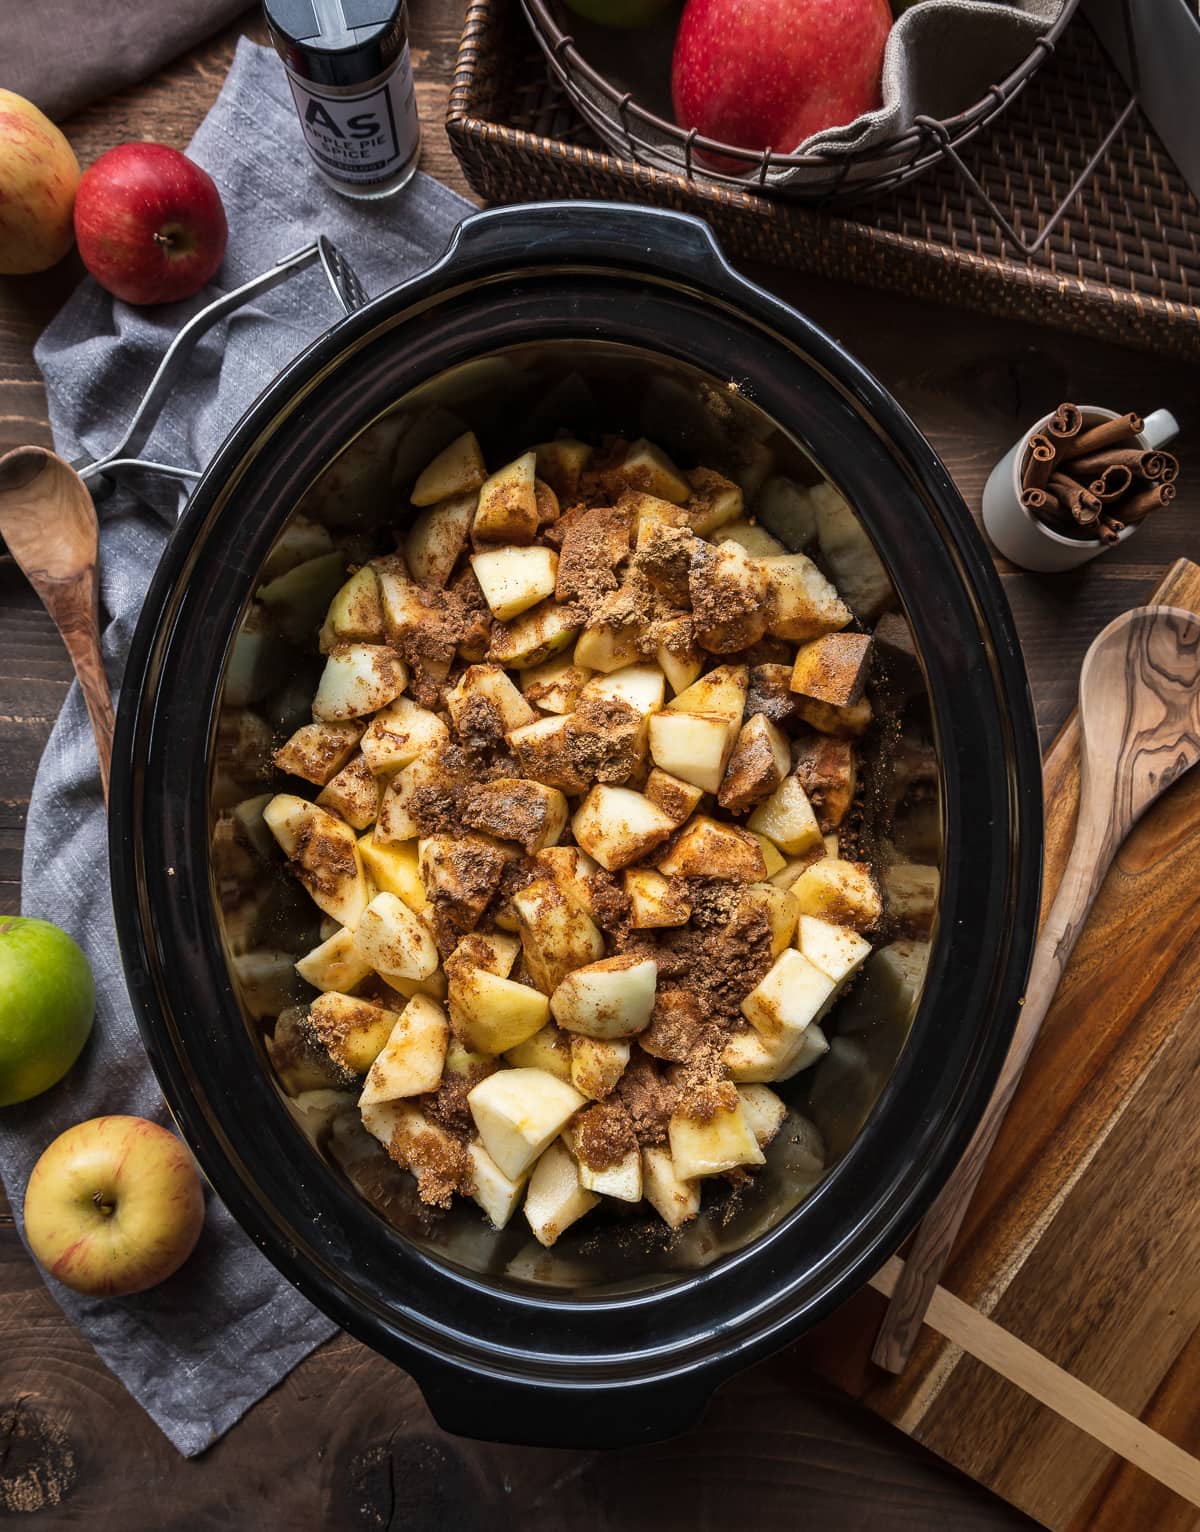 diced apples with spices in a slow cooker